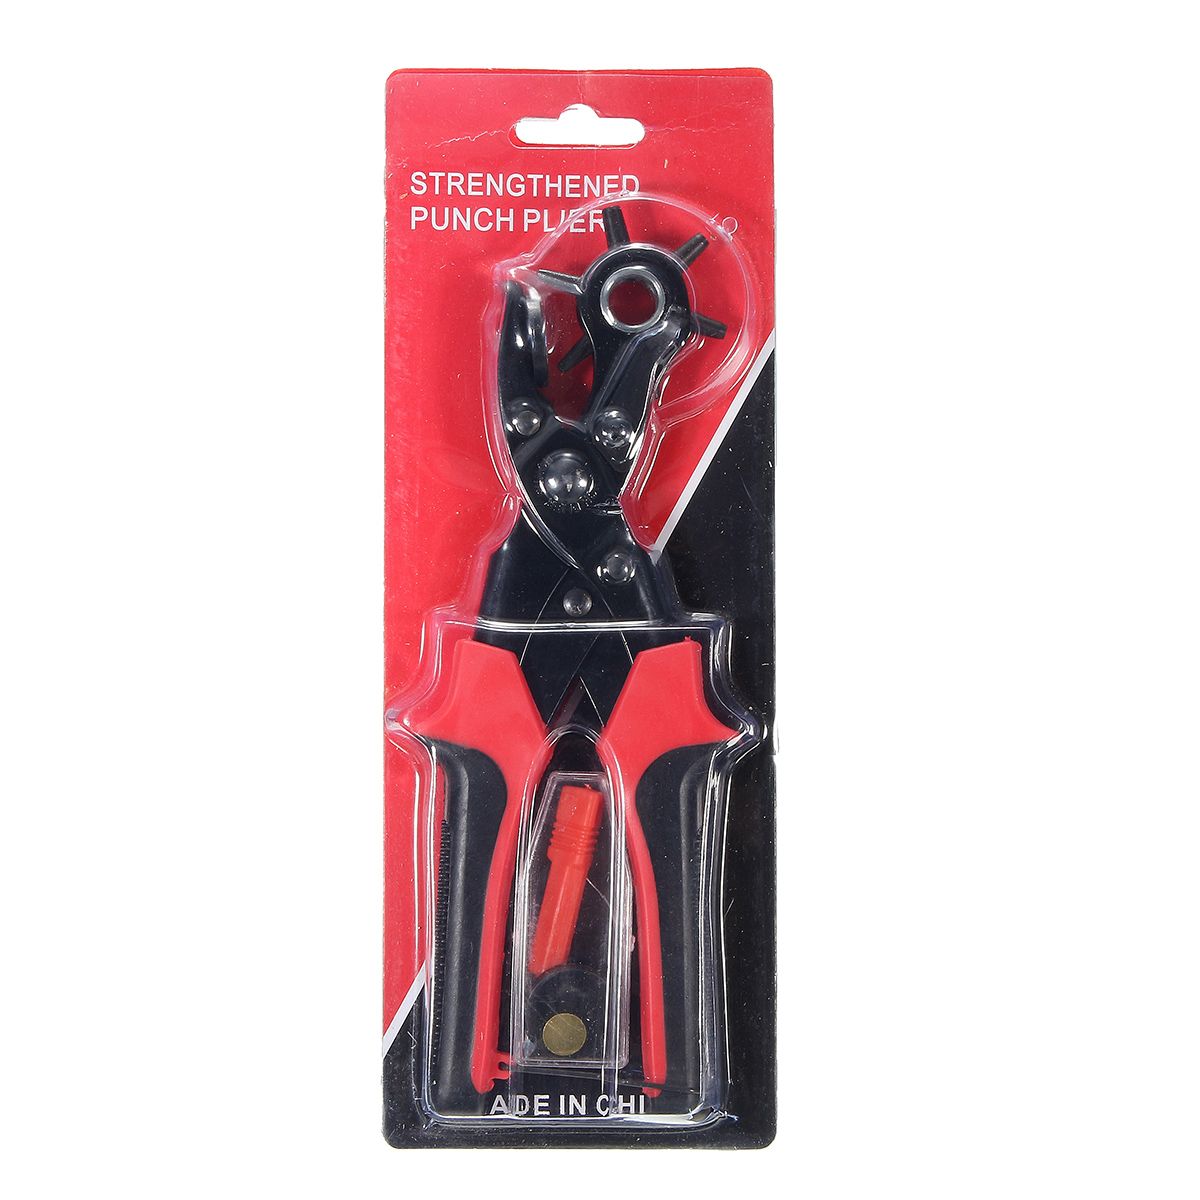 6-Sized-Heavy-Duty-Leather-Hole-Punch-Hand-Pliers-Belt-Holes-Punches-Maker-Tool-1150421